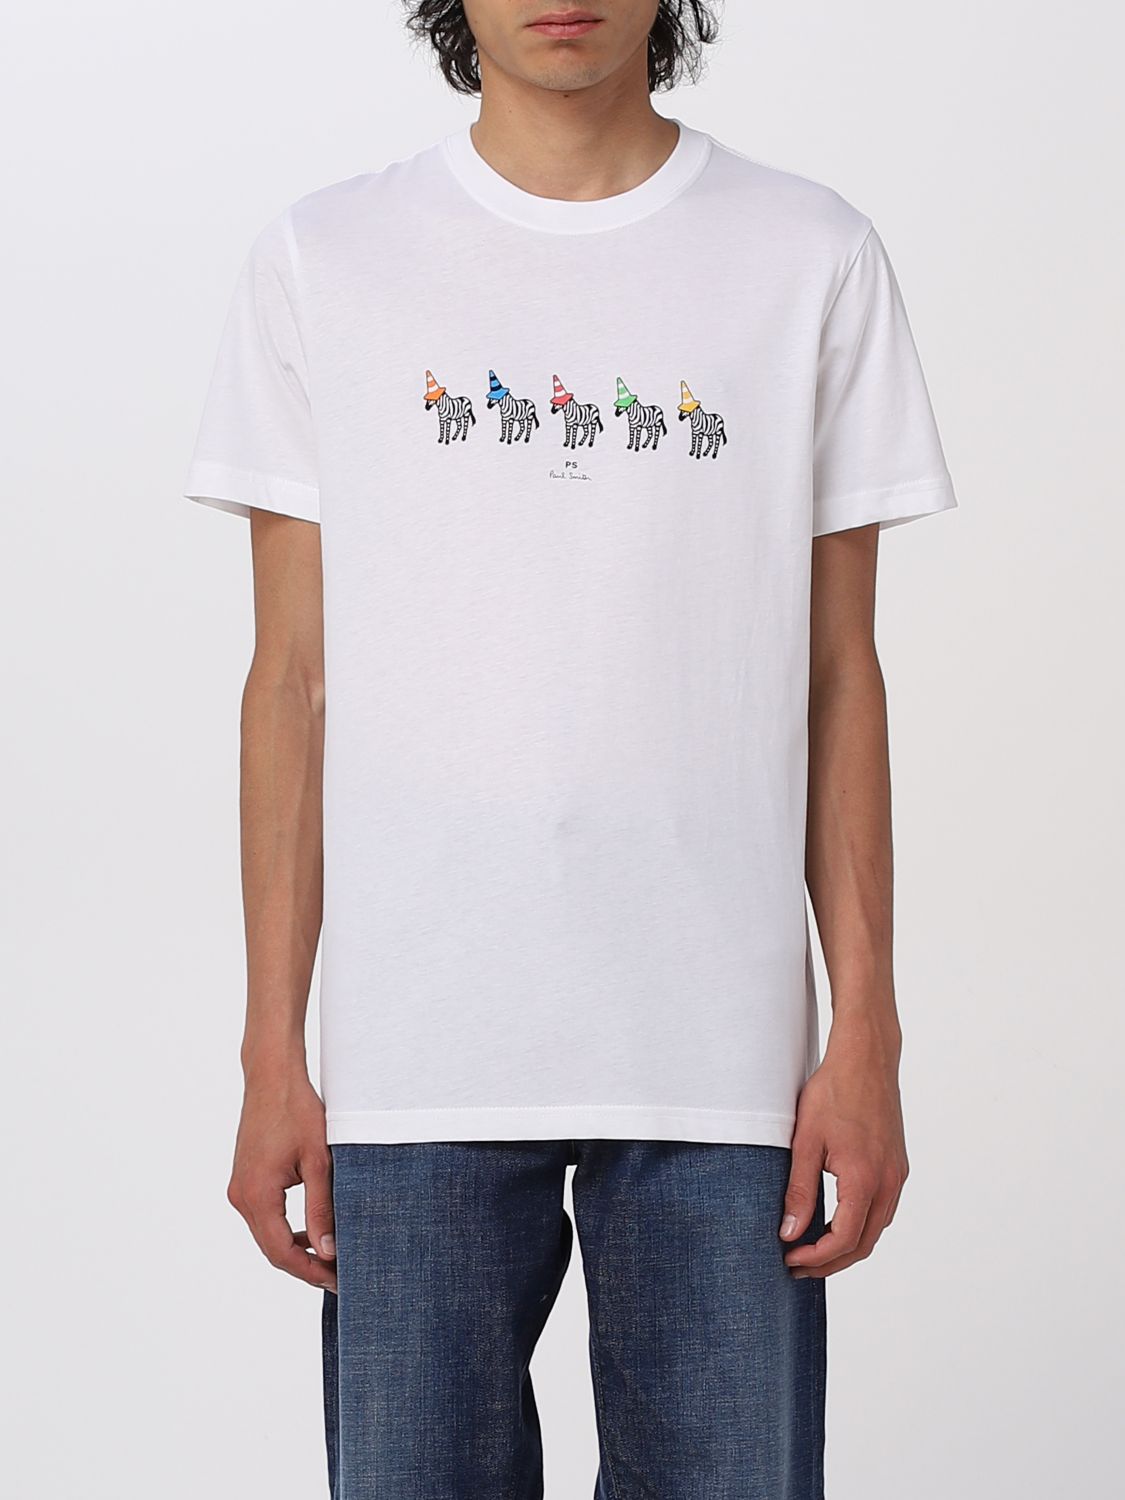 PS PAUL SMITH: t-shirt for man - White | Ps Paul Smith t-shirt ...